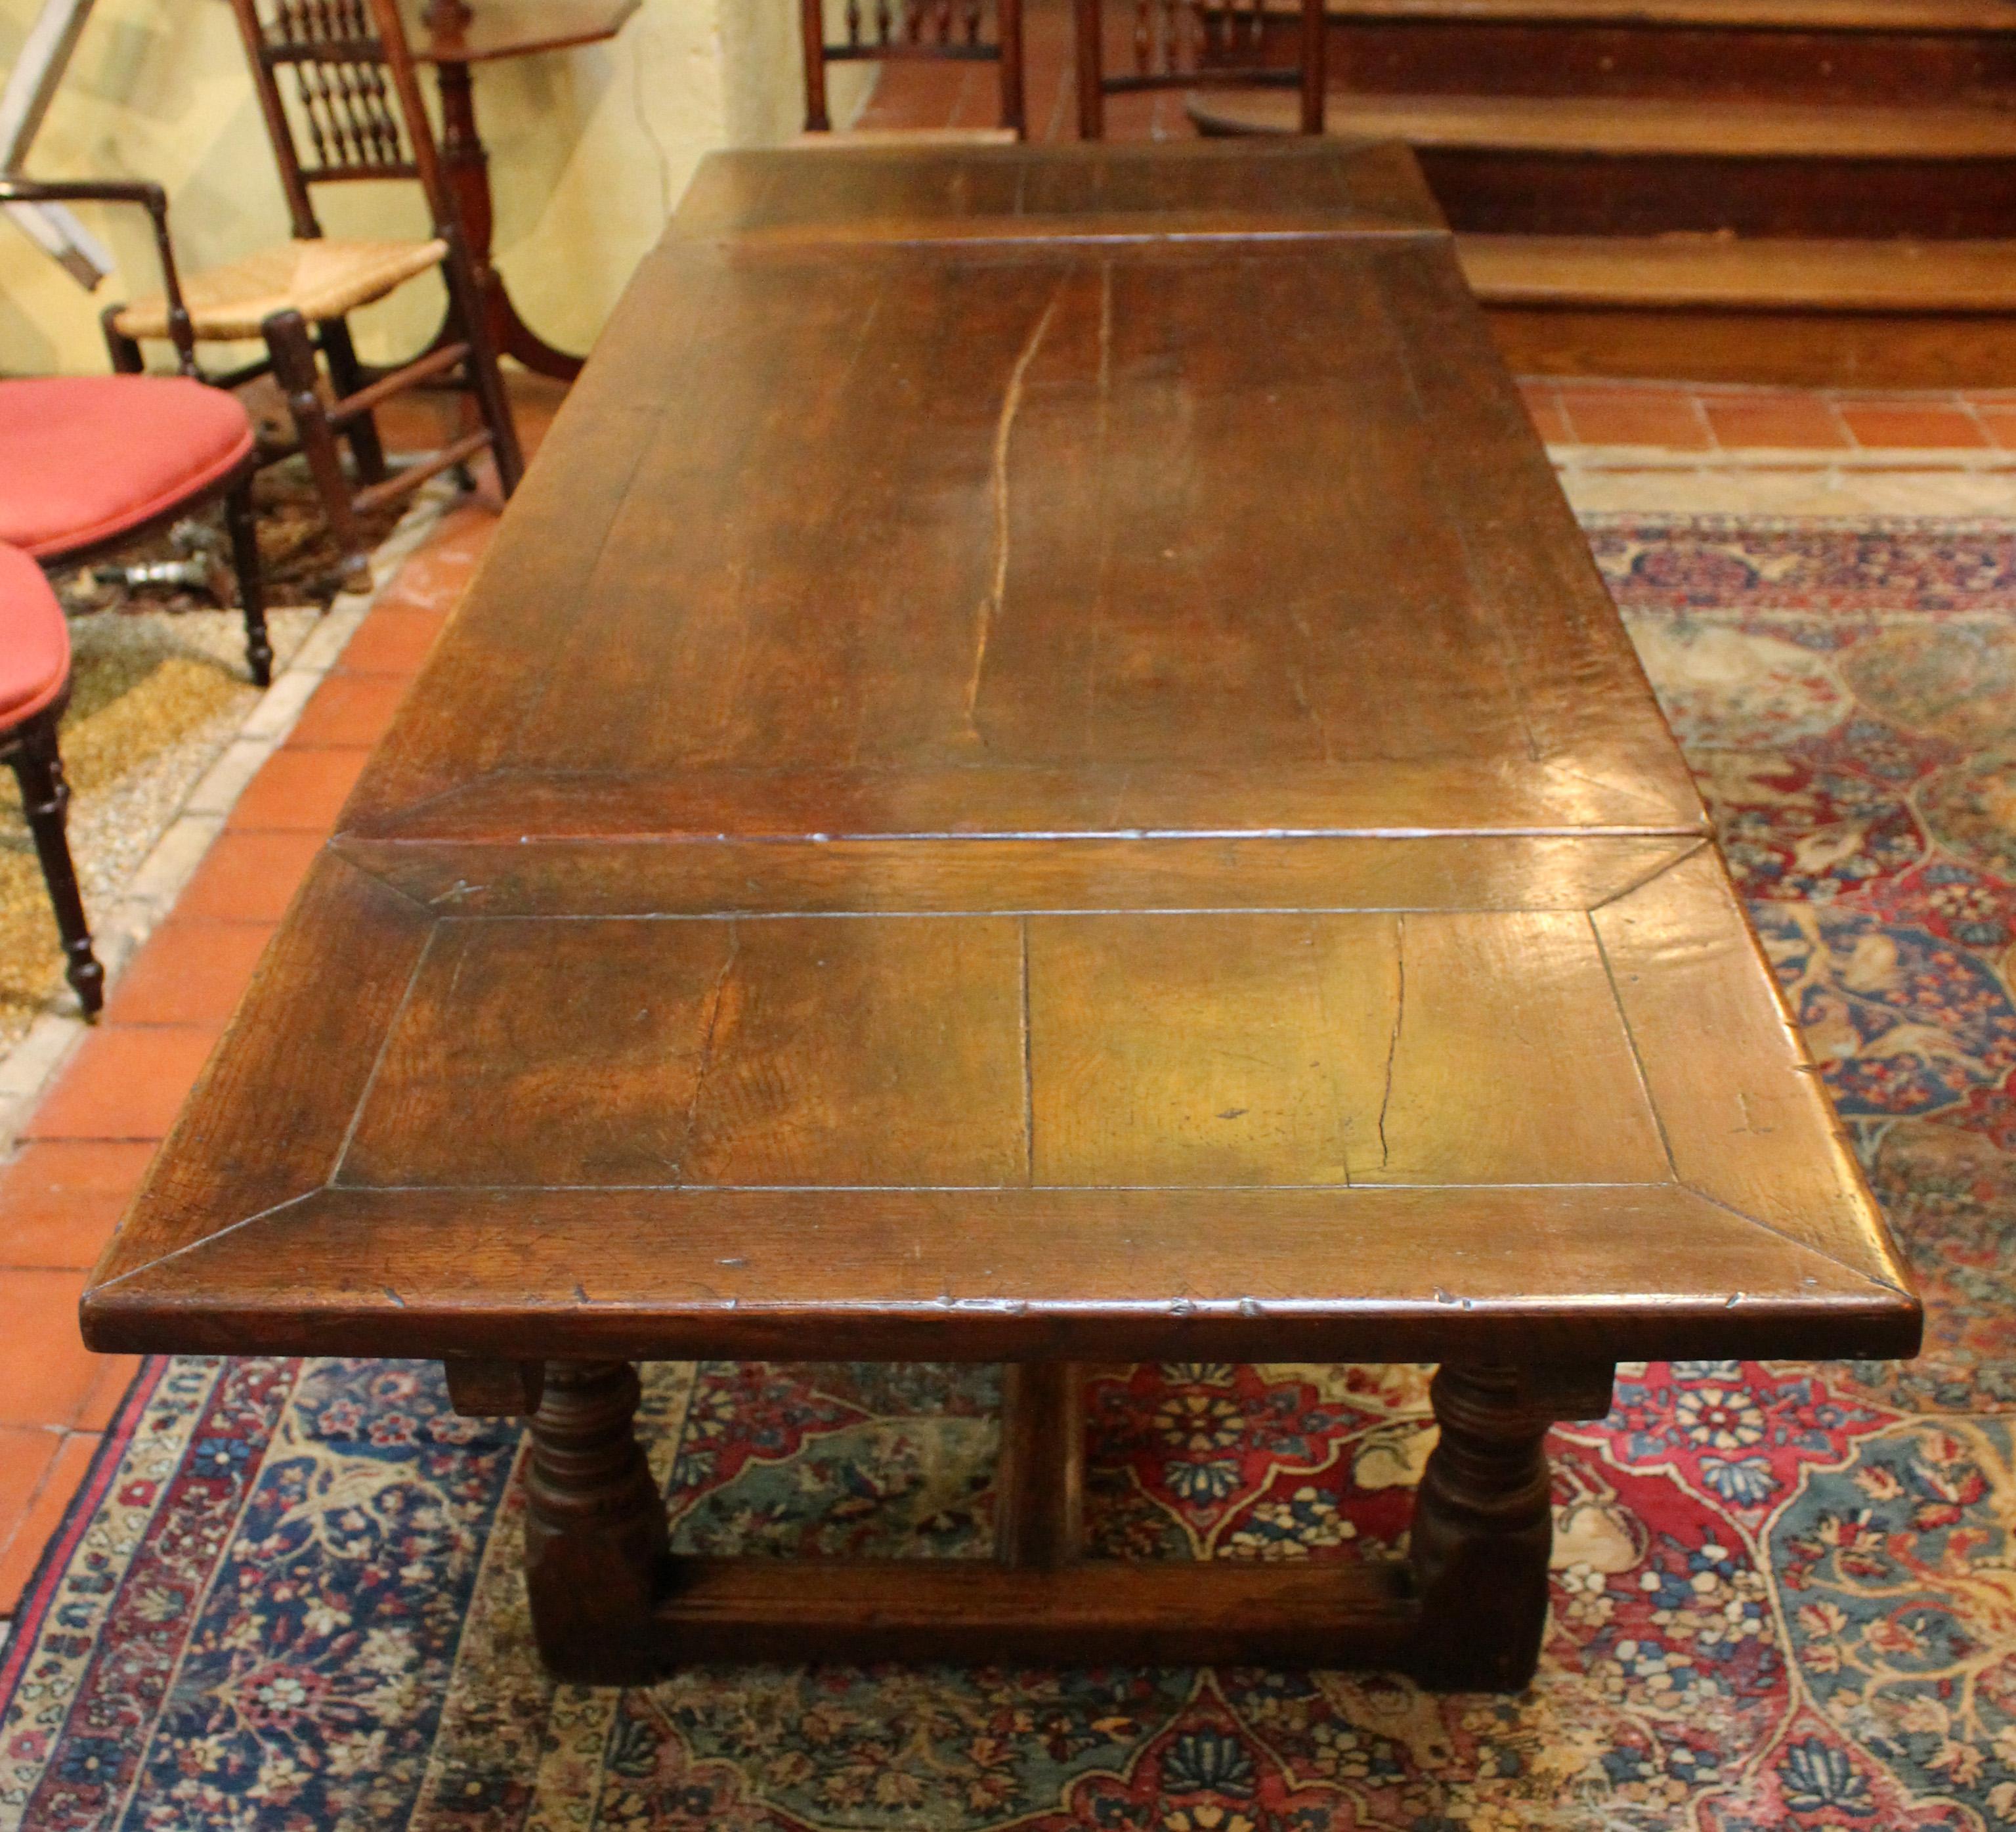 Circa 1860 Jacobean revival style draw leaf table, English. Oak. Solid form with chunky tops, h-stretcher & robust ring & vasi form carved legs.
31 3/4